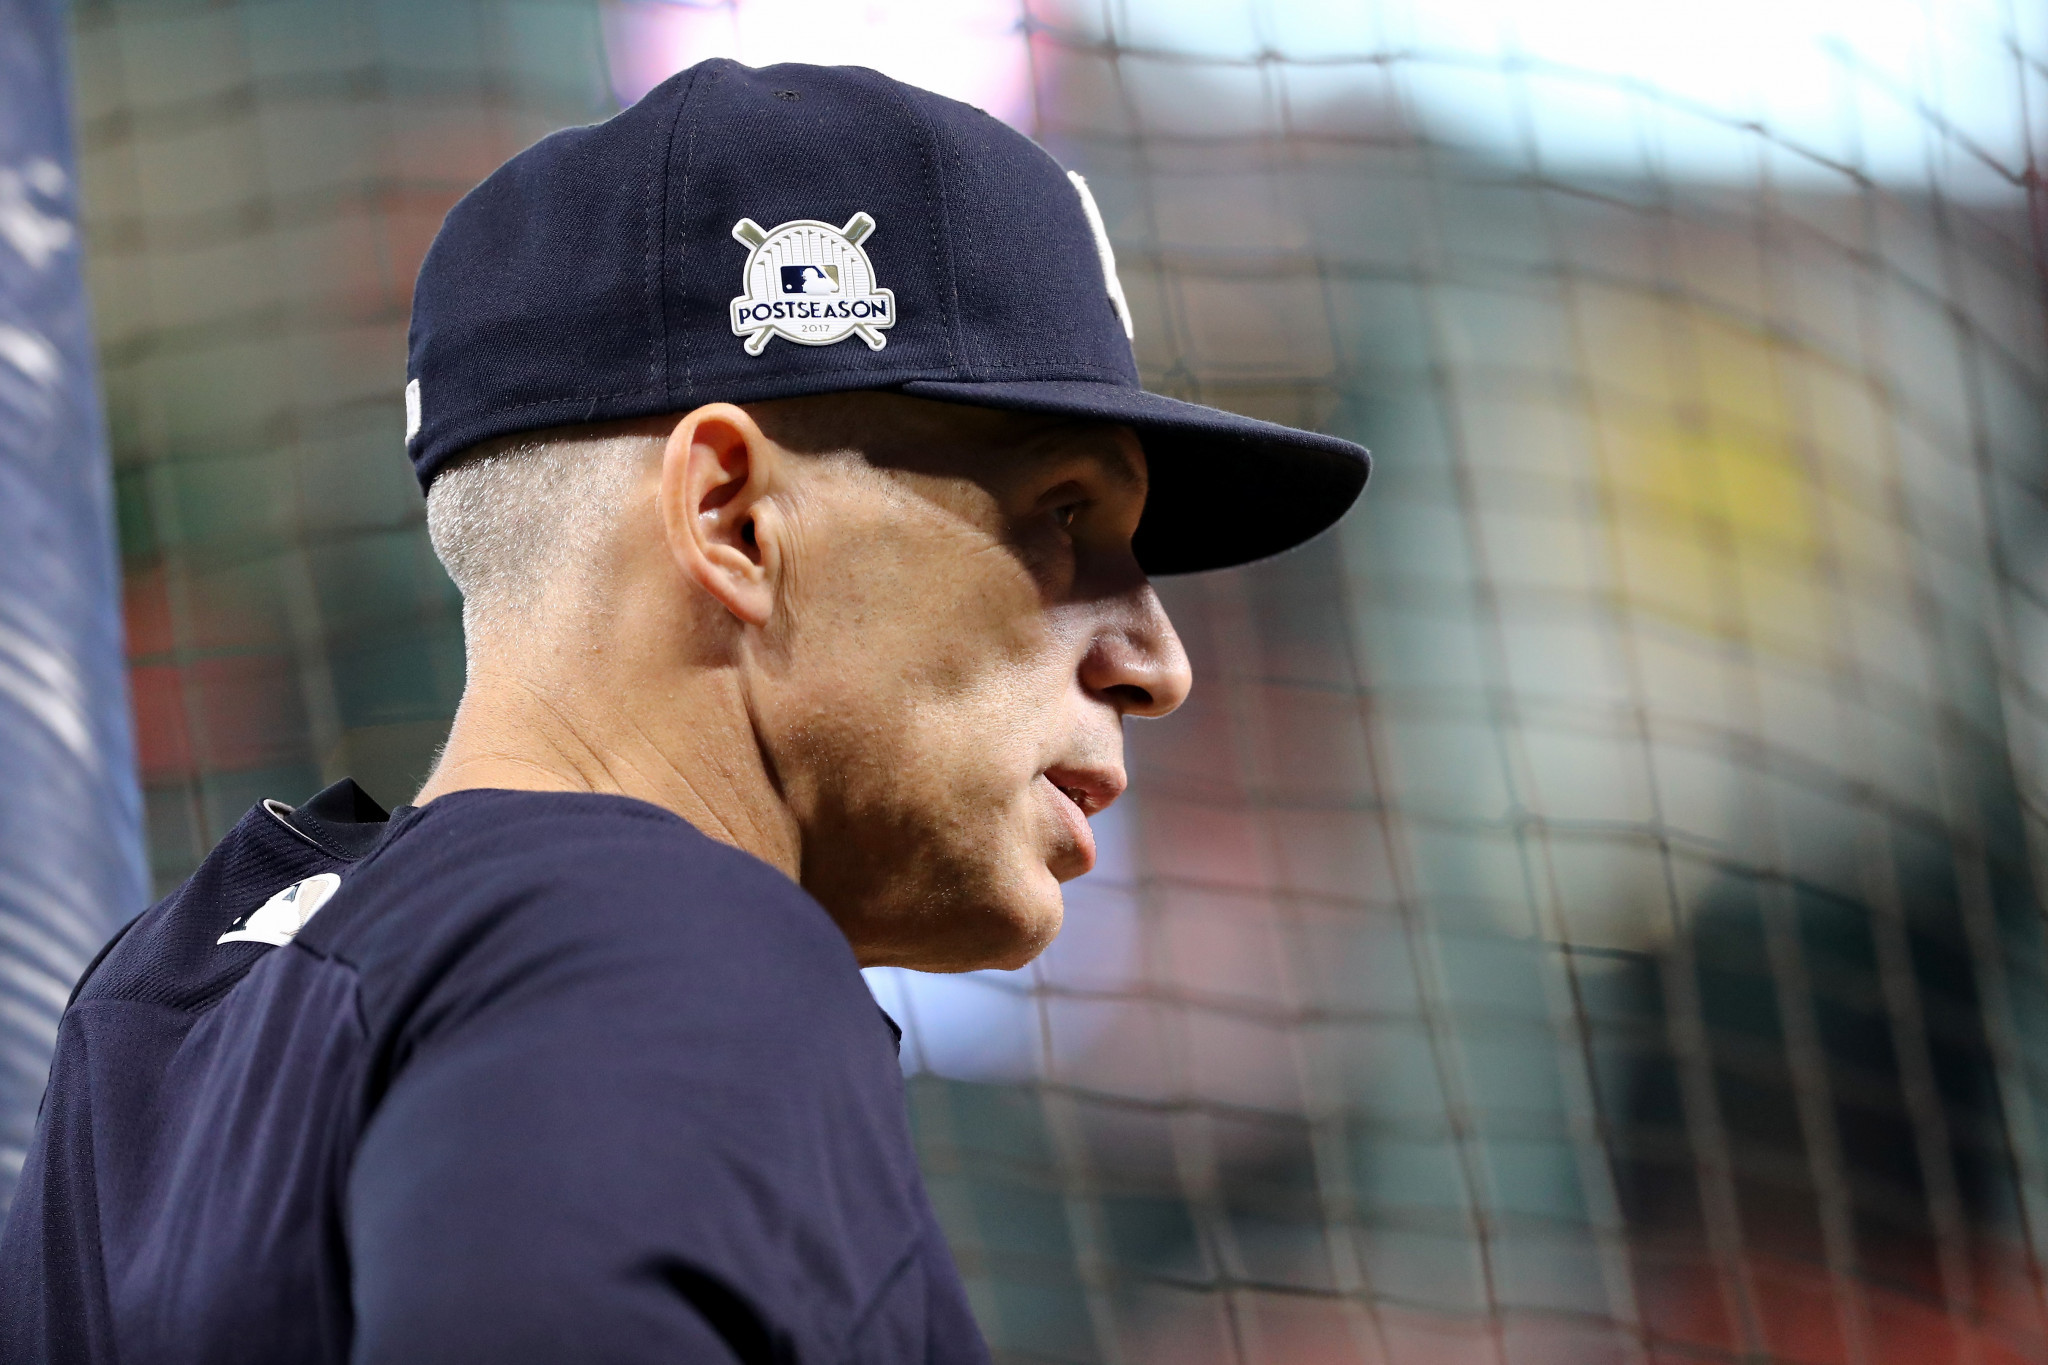 Joe Girardi will be tasked with helping the US qualify for the men's baseball event at Tokyo 2020 ©Getty Images